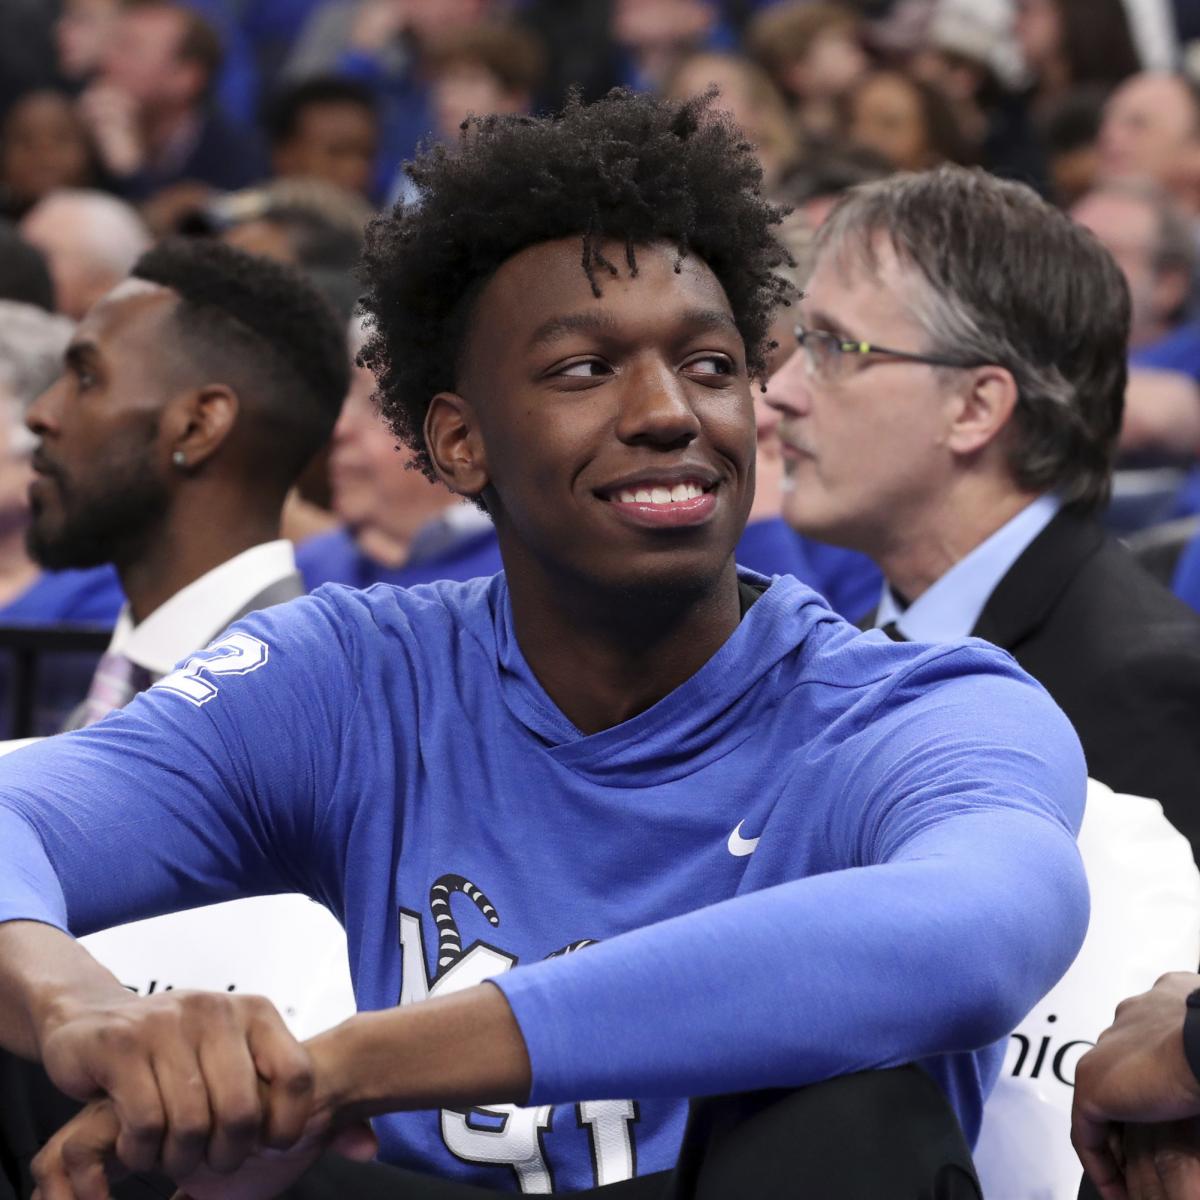 NBA Draft 2020: 1st-Round Mock Draft, Landing Spots for Coveted Prospects